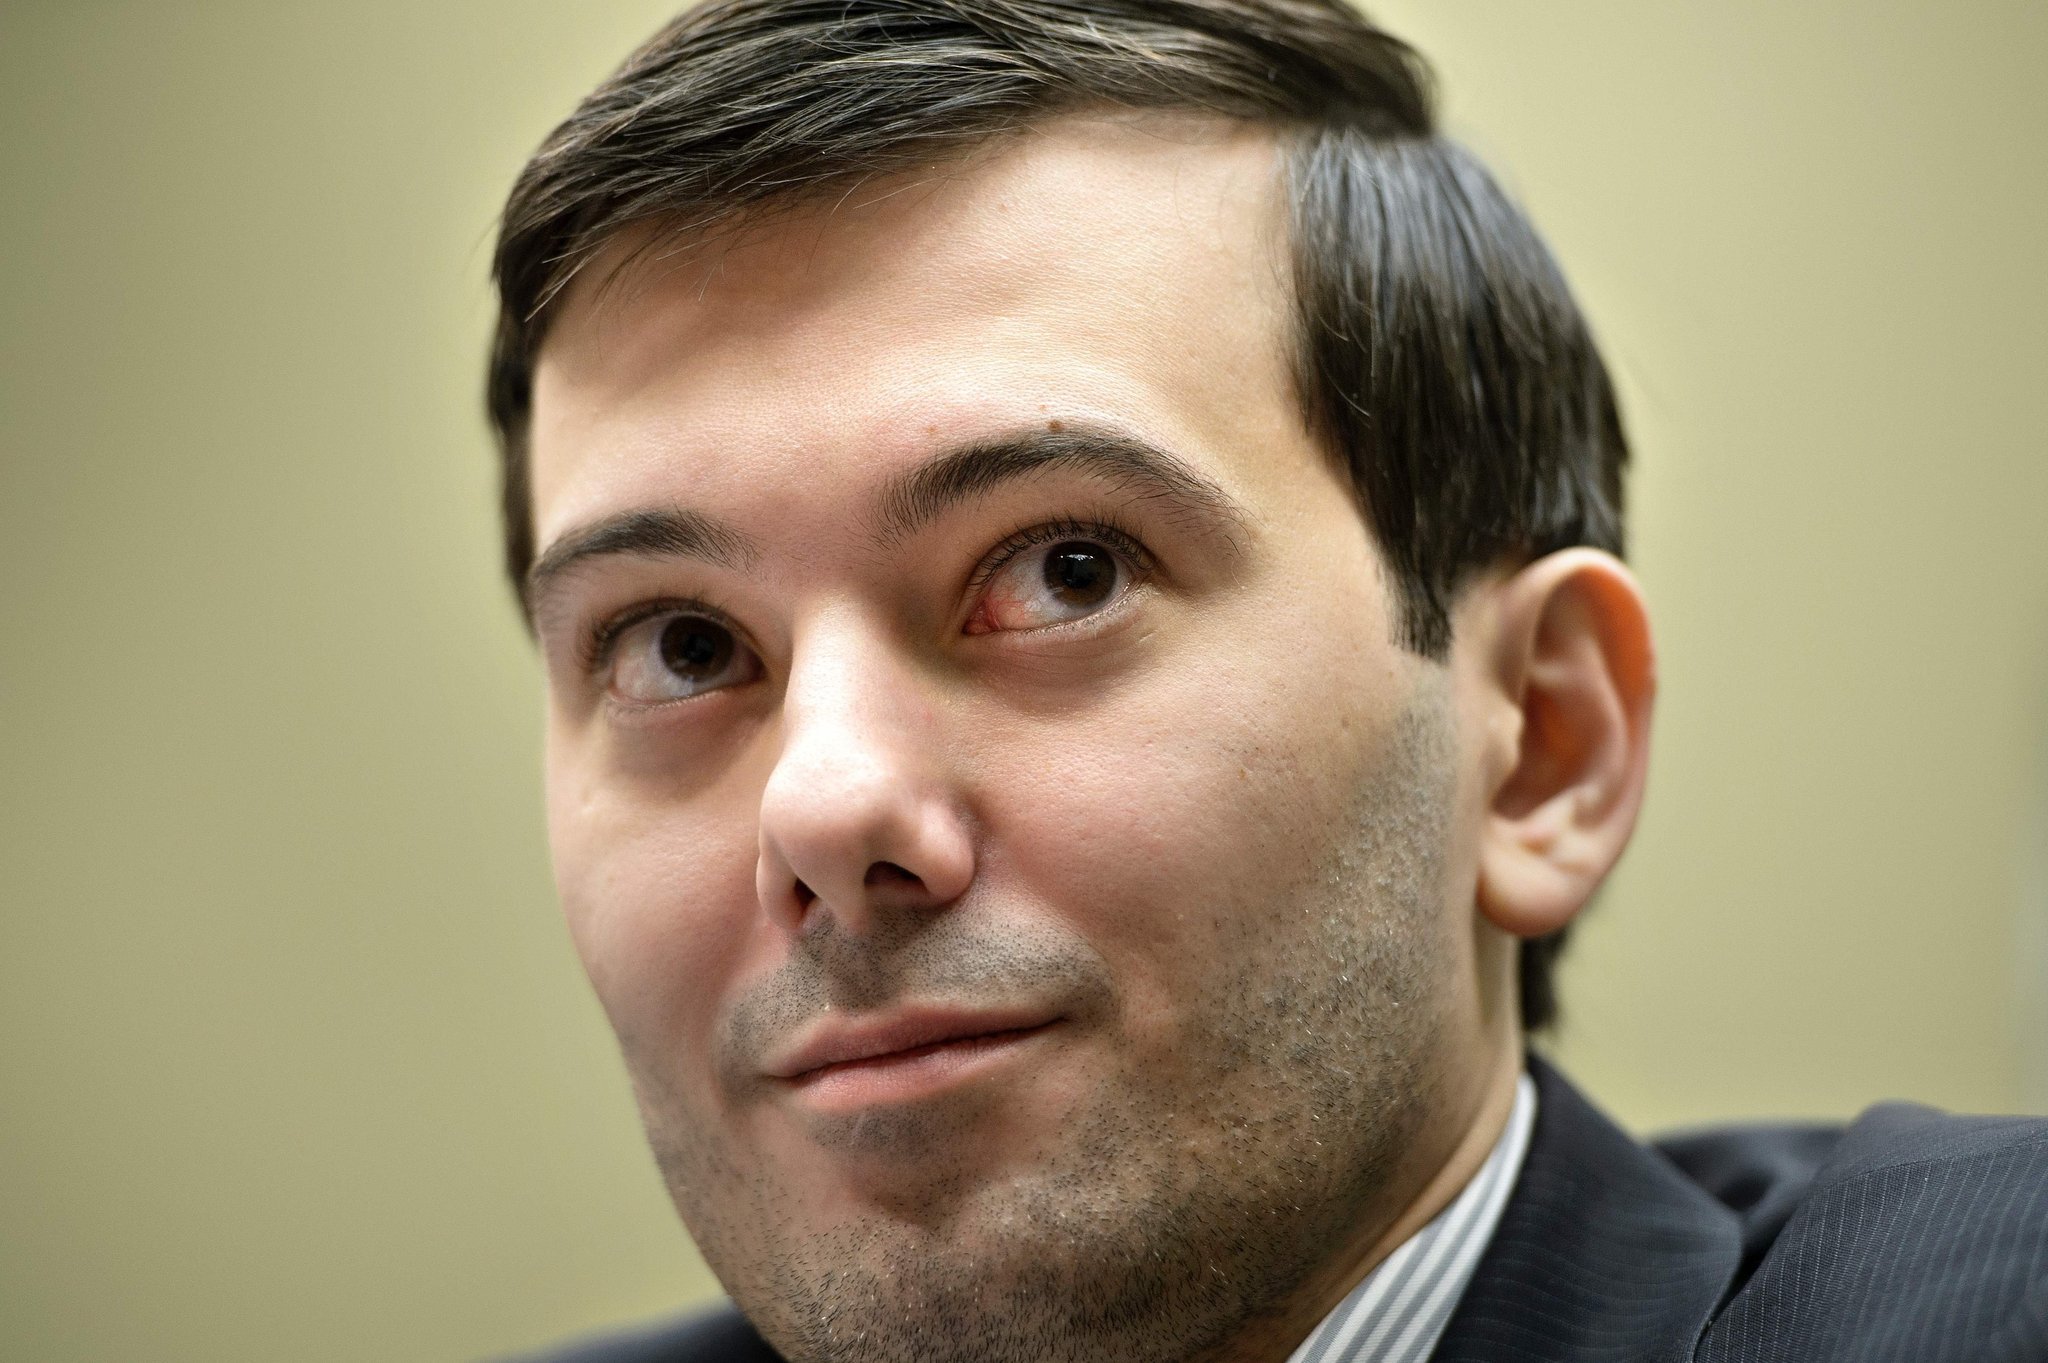 Smirking pharma CEO Martin Shkreli leaves lawmakers infuriated after ...